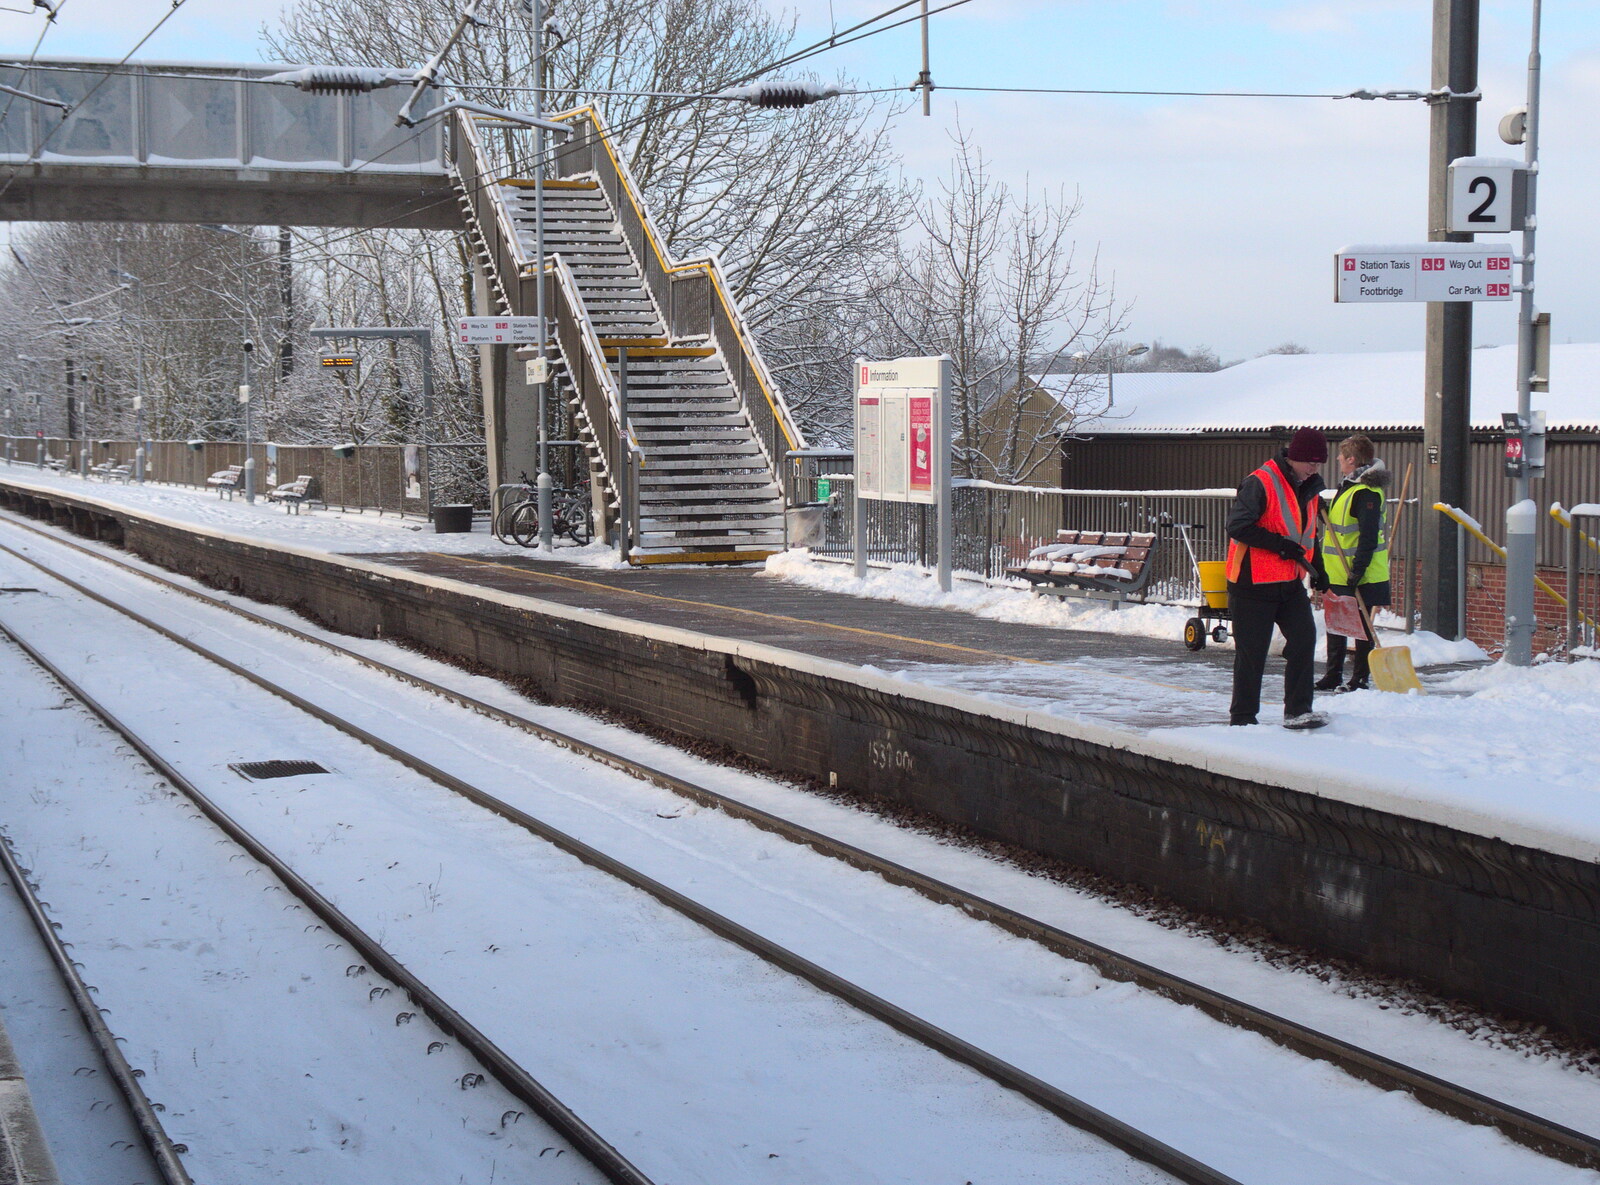 Snowmageddon: The Beast From the East, Suffolk and London - 27th February 2018: There's a small clear patch on Platform 2